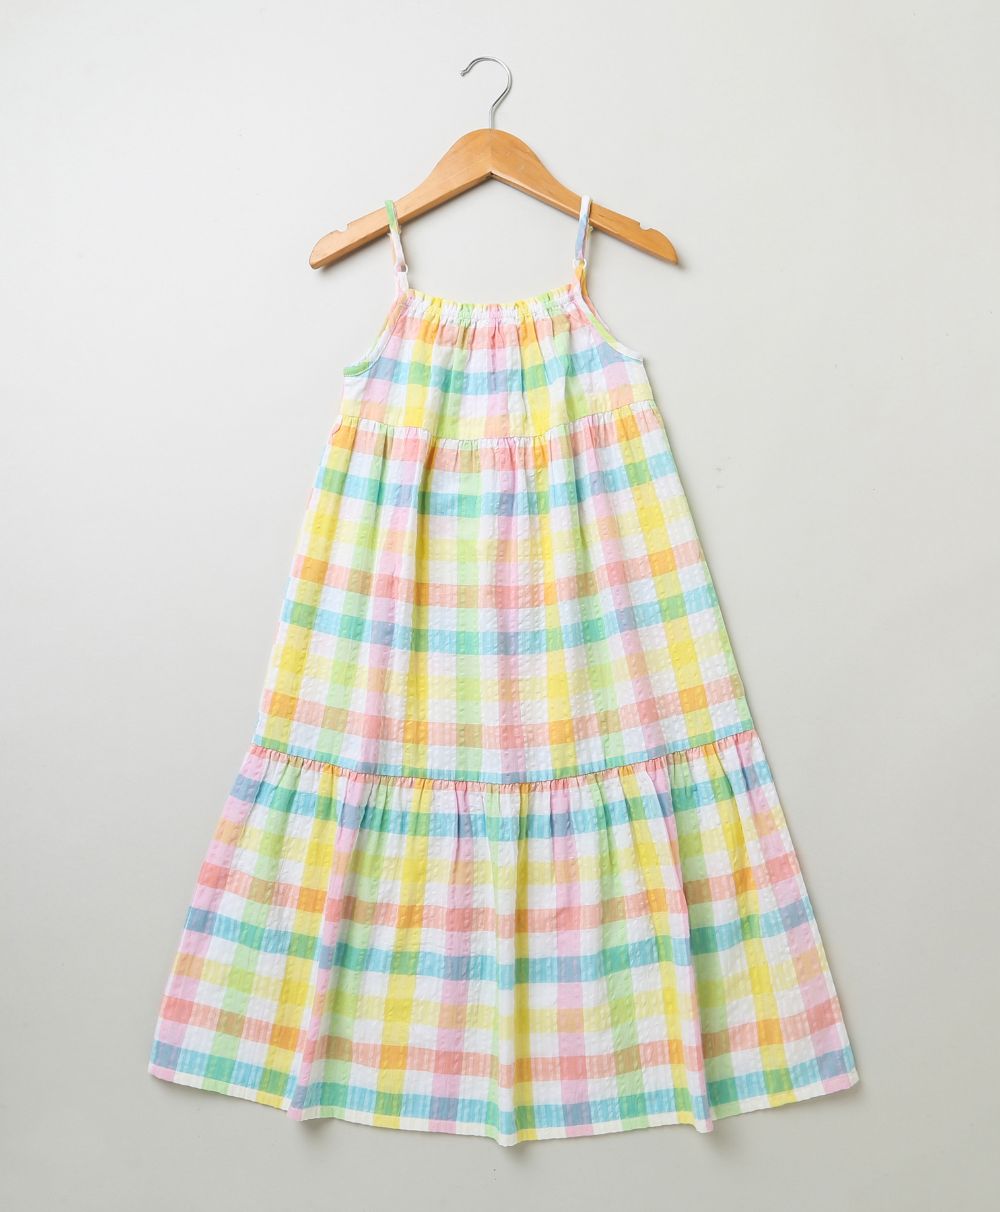 Sweetlime By AS Cotton Singlet Sleeves frock with ajustable strap Shoulder Checkered - Multi - SLG-DRESS-00955_2-3 Y